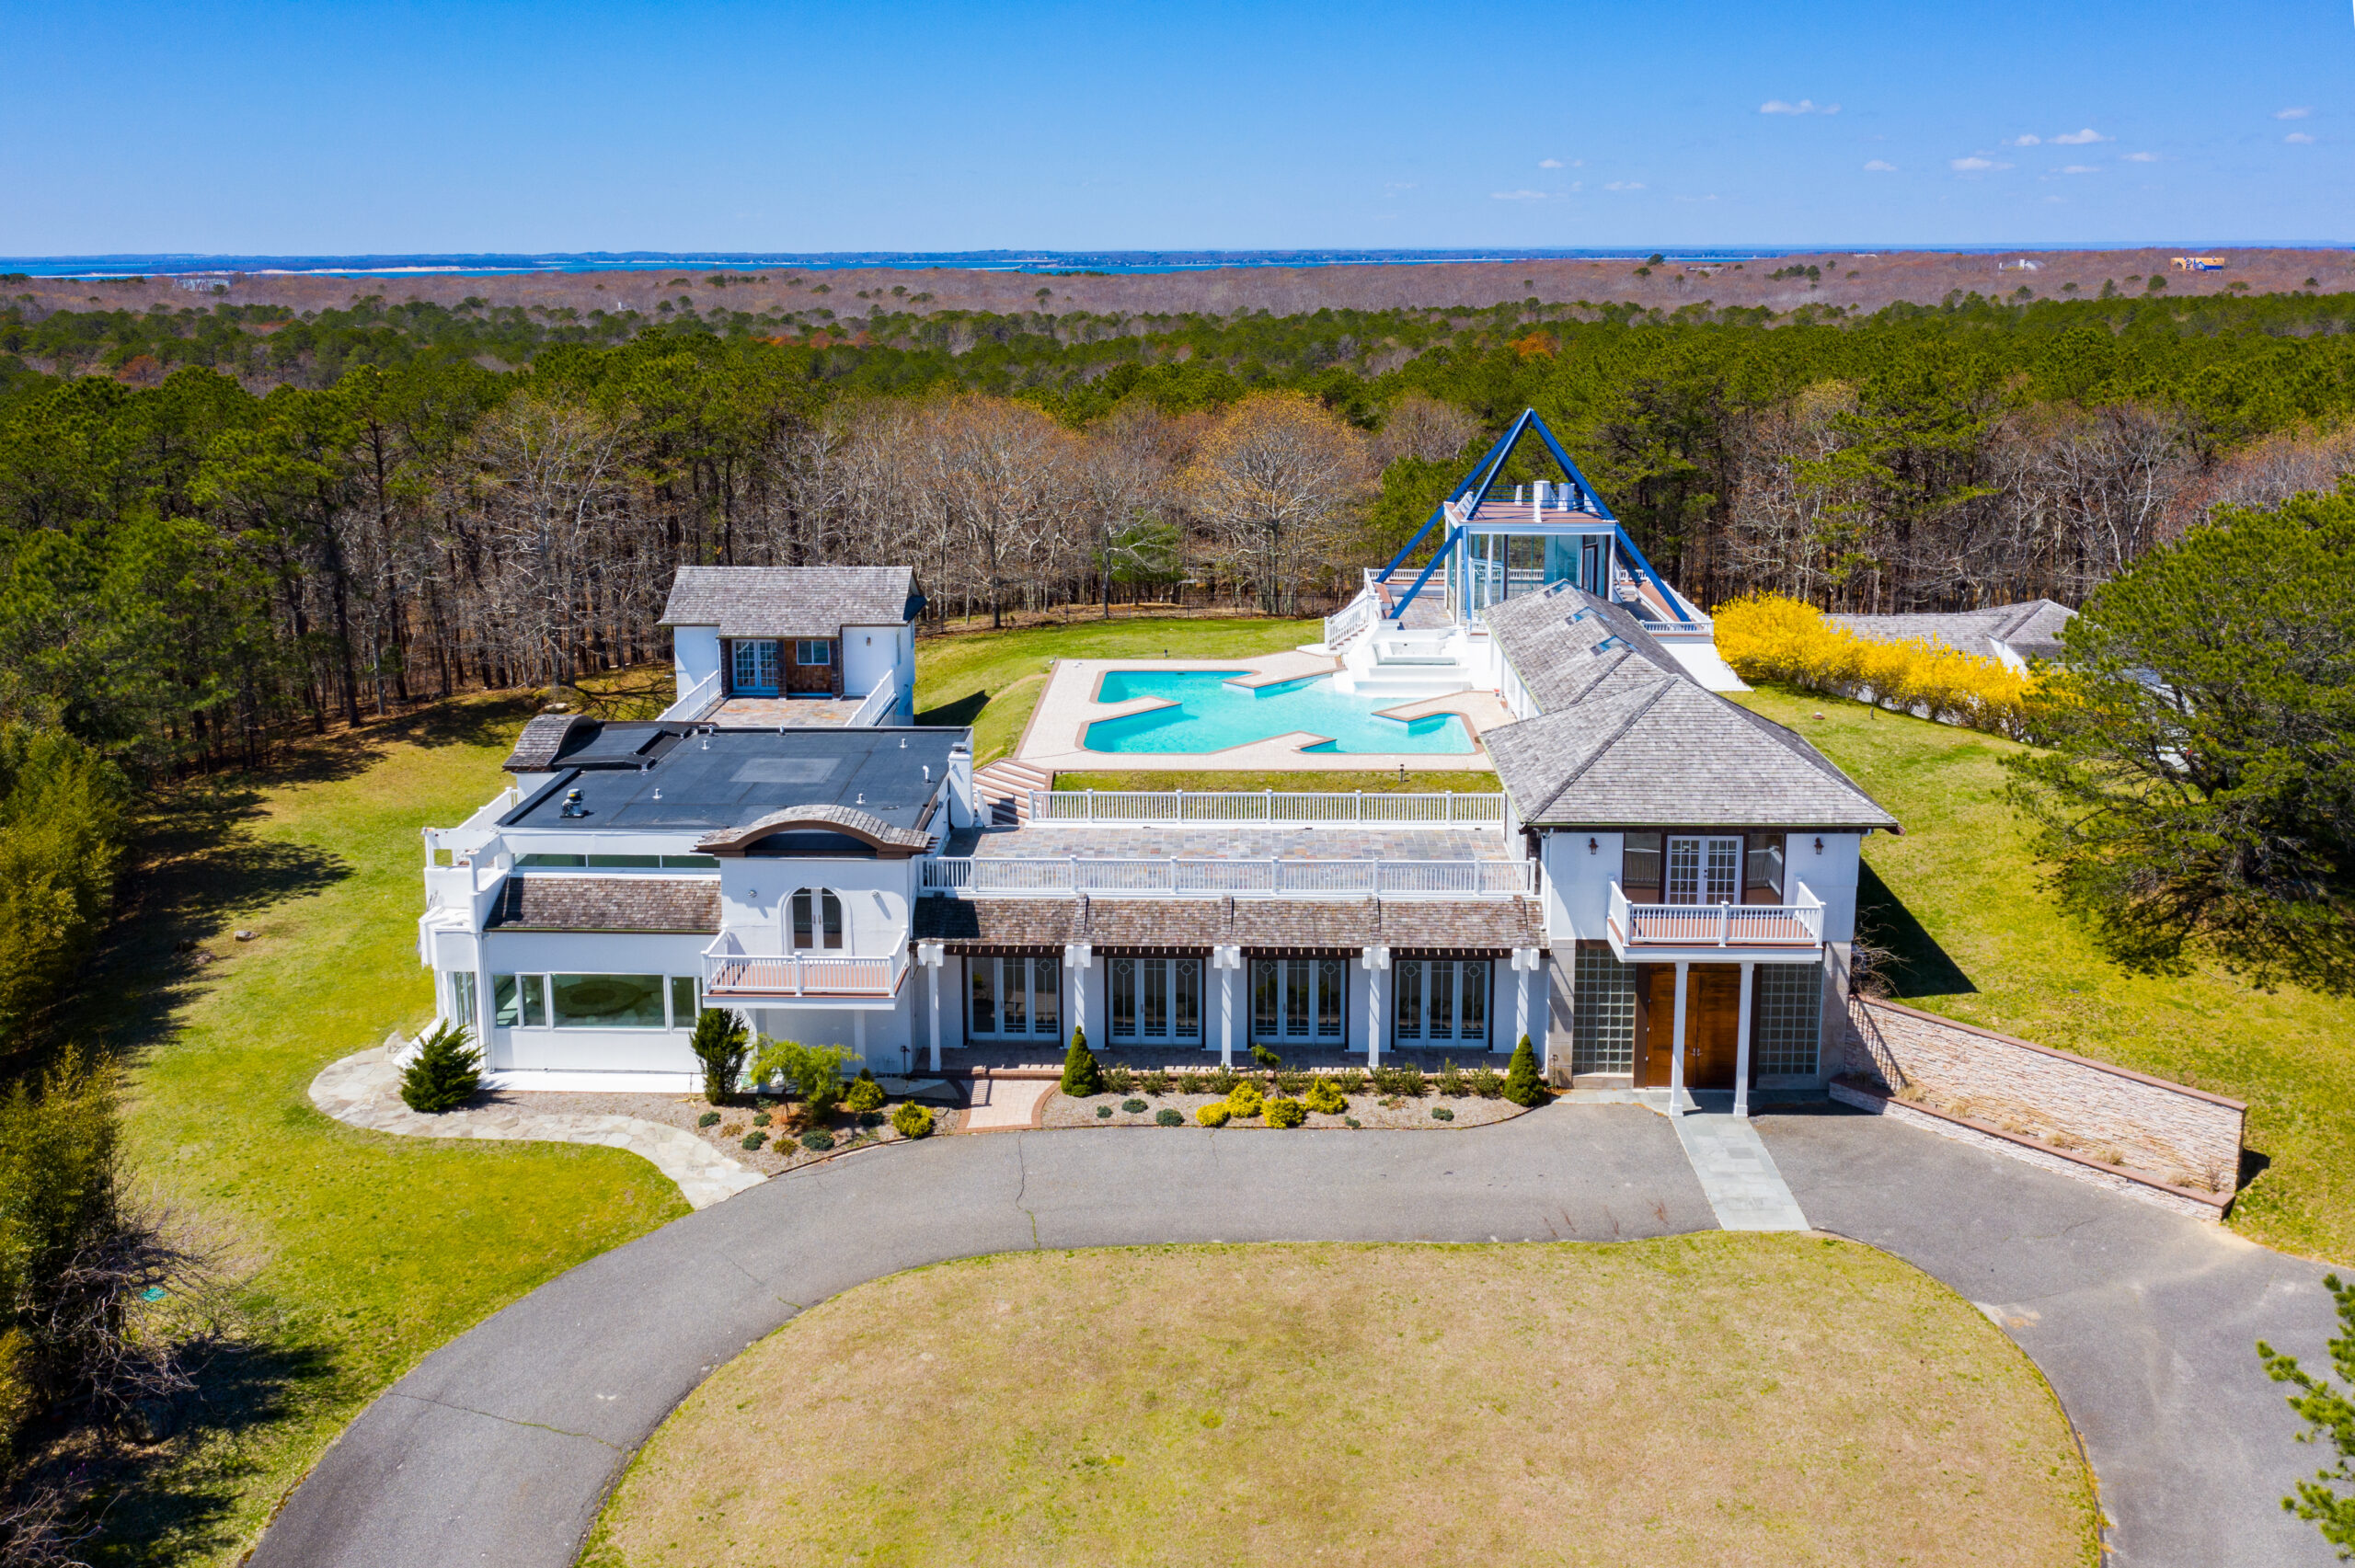 Island in the Sky in Water Mill is going up for auction this month. HARRIS ALLEN